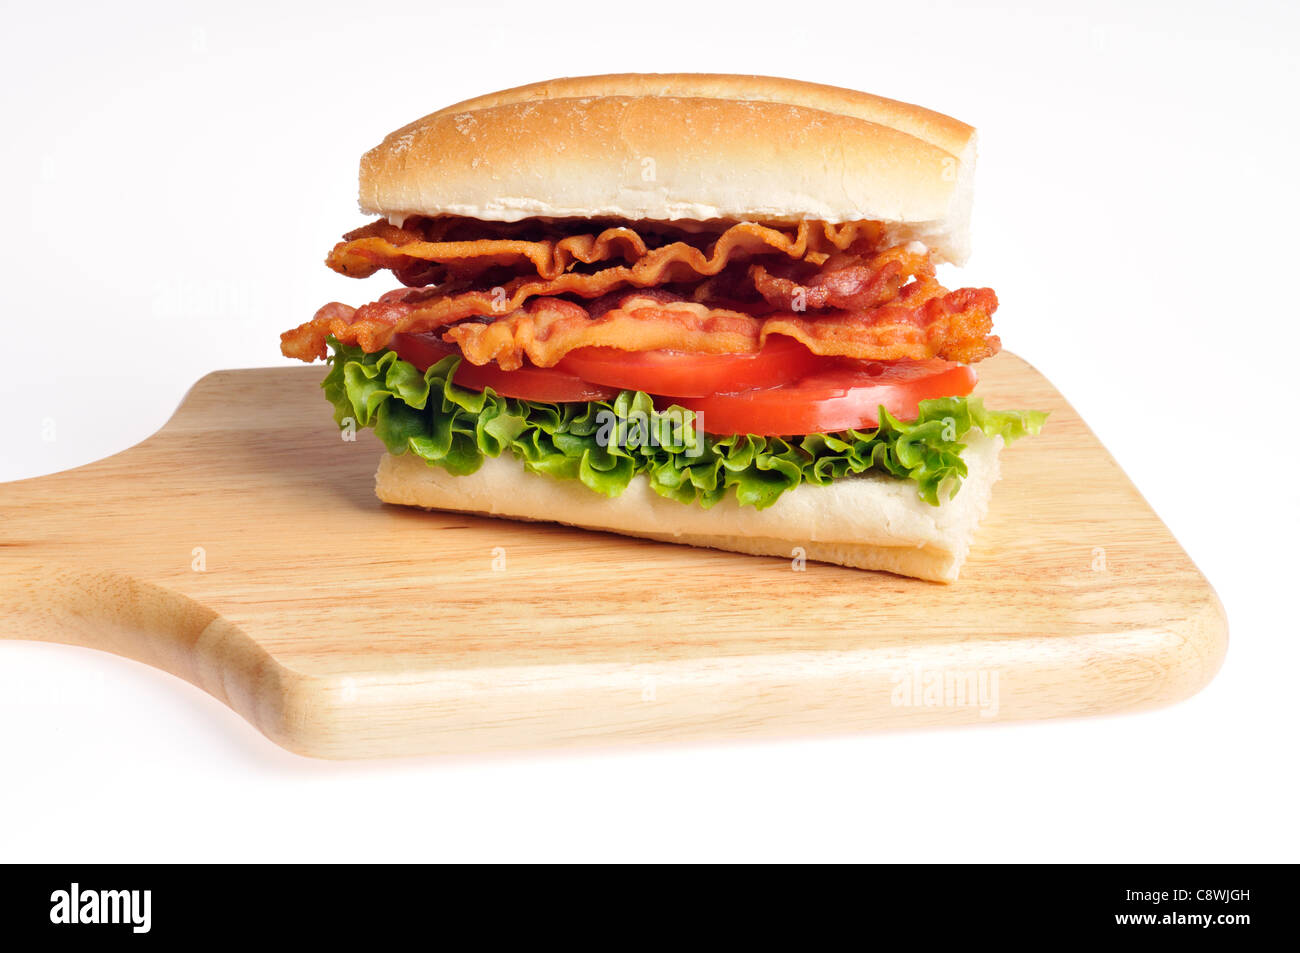 Bacon, Lettuce and Tomato BLT sandwich on a  bread roll on a wood cutting board on a white background. USA Stock Photo